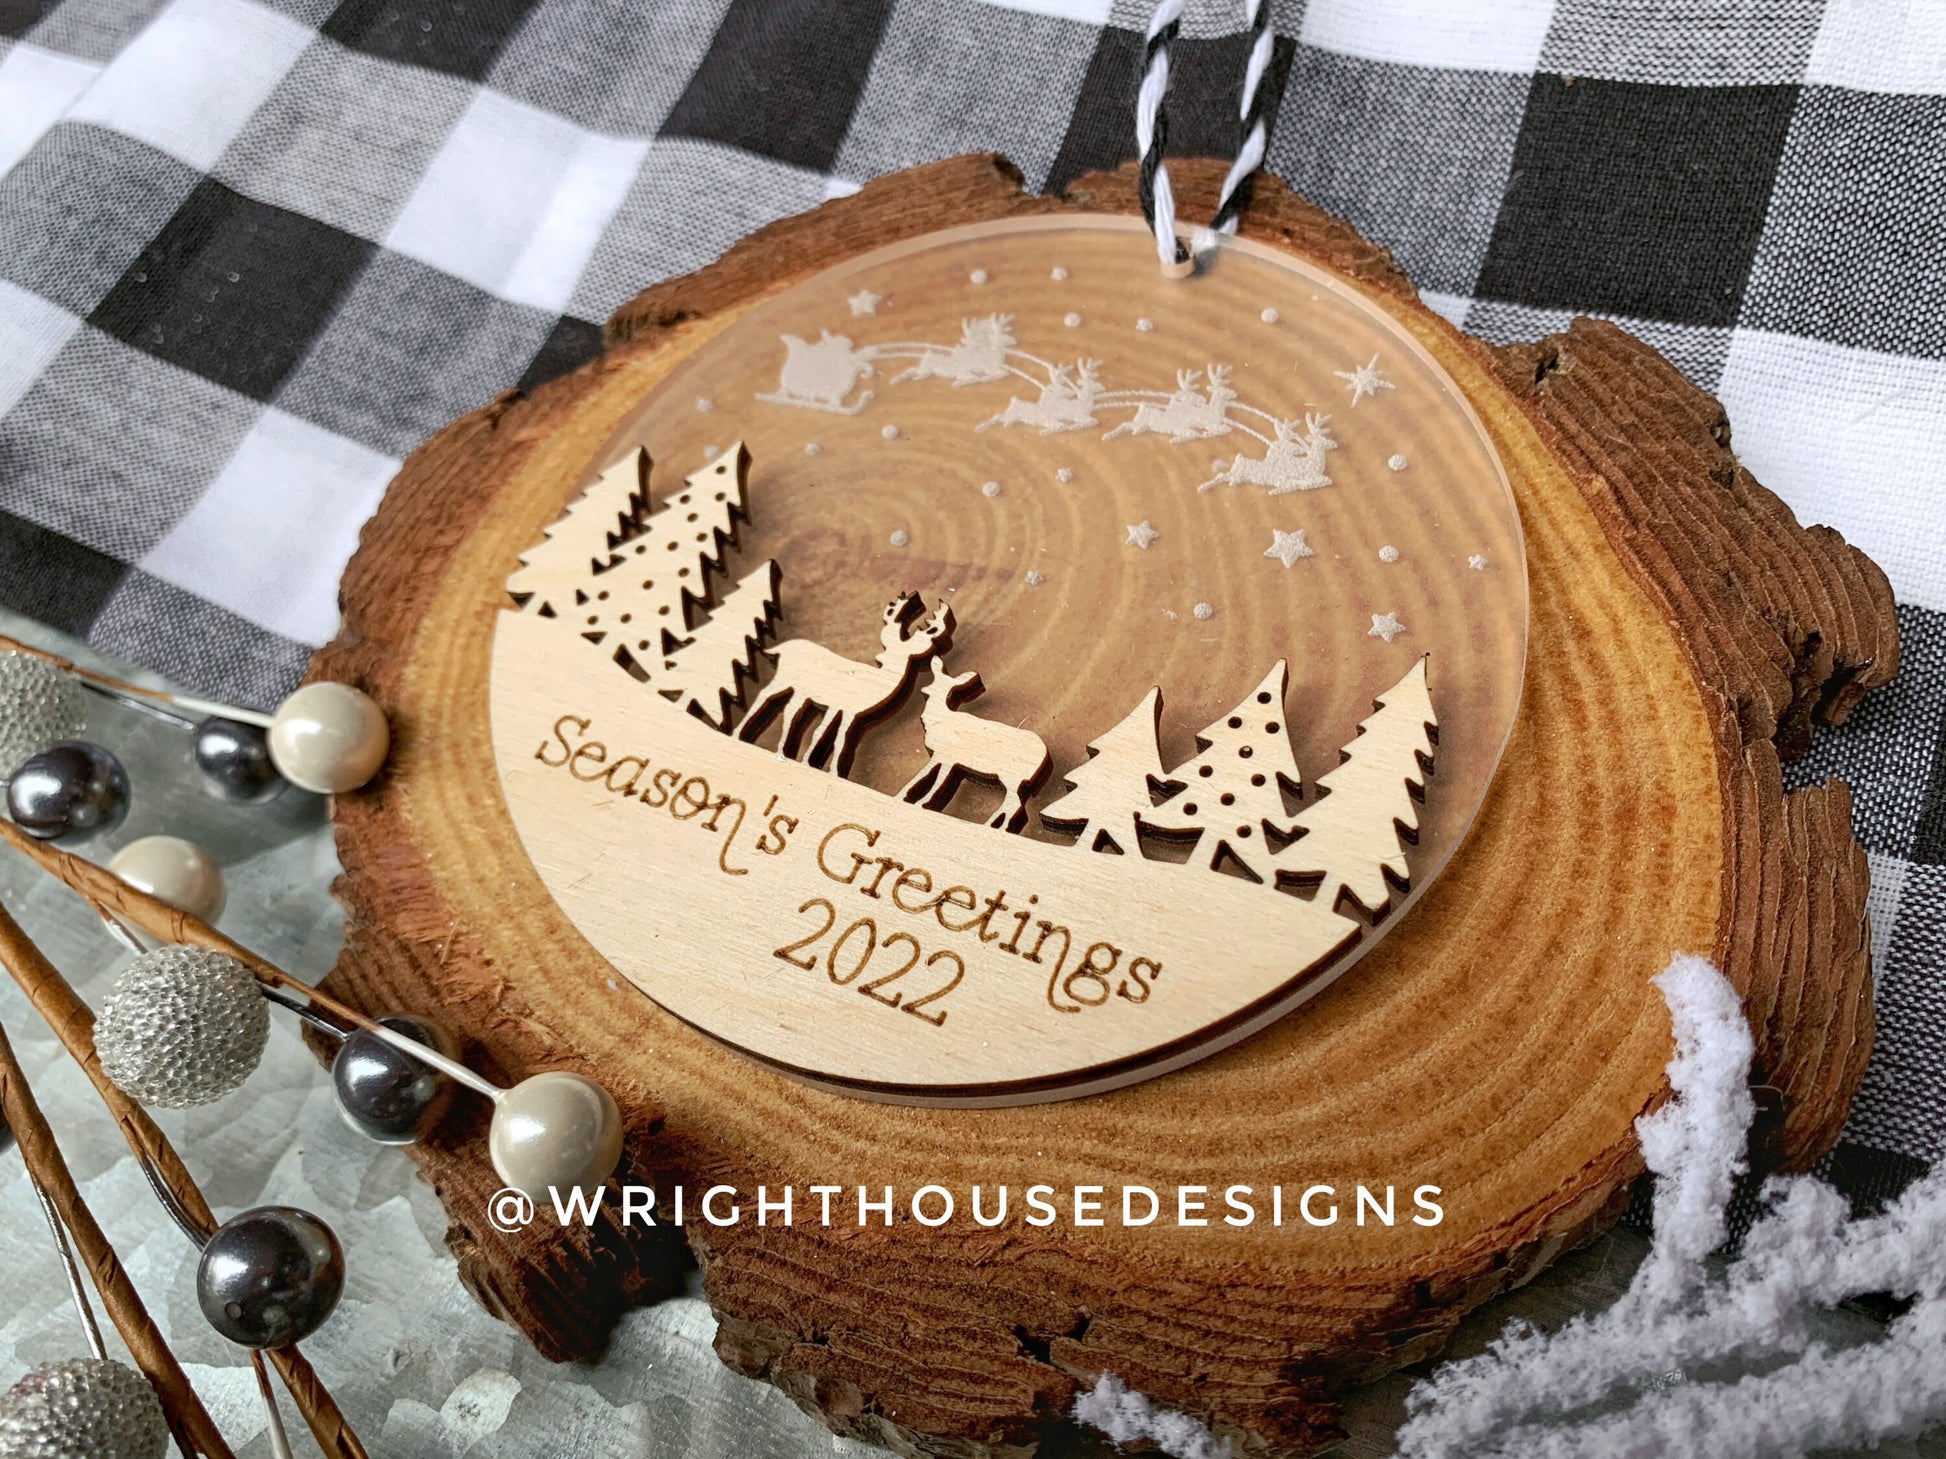 Santa’s Sleigh - Winter Woodland Deer Scene - Yearly Christmas Eve Tree Ornament - Layered Wood and Acrylic - Stocking Tag - Holiday Decor